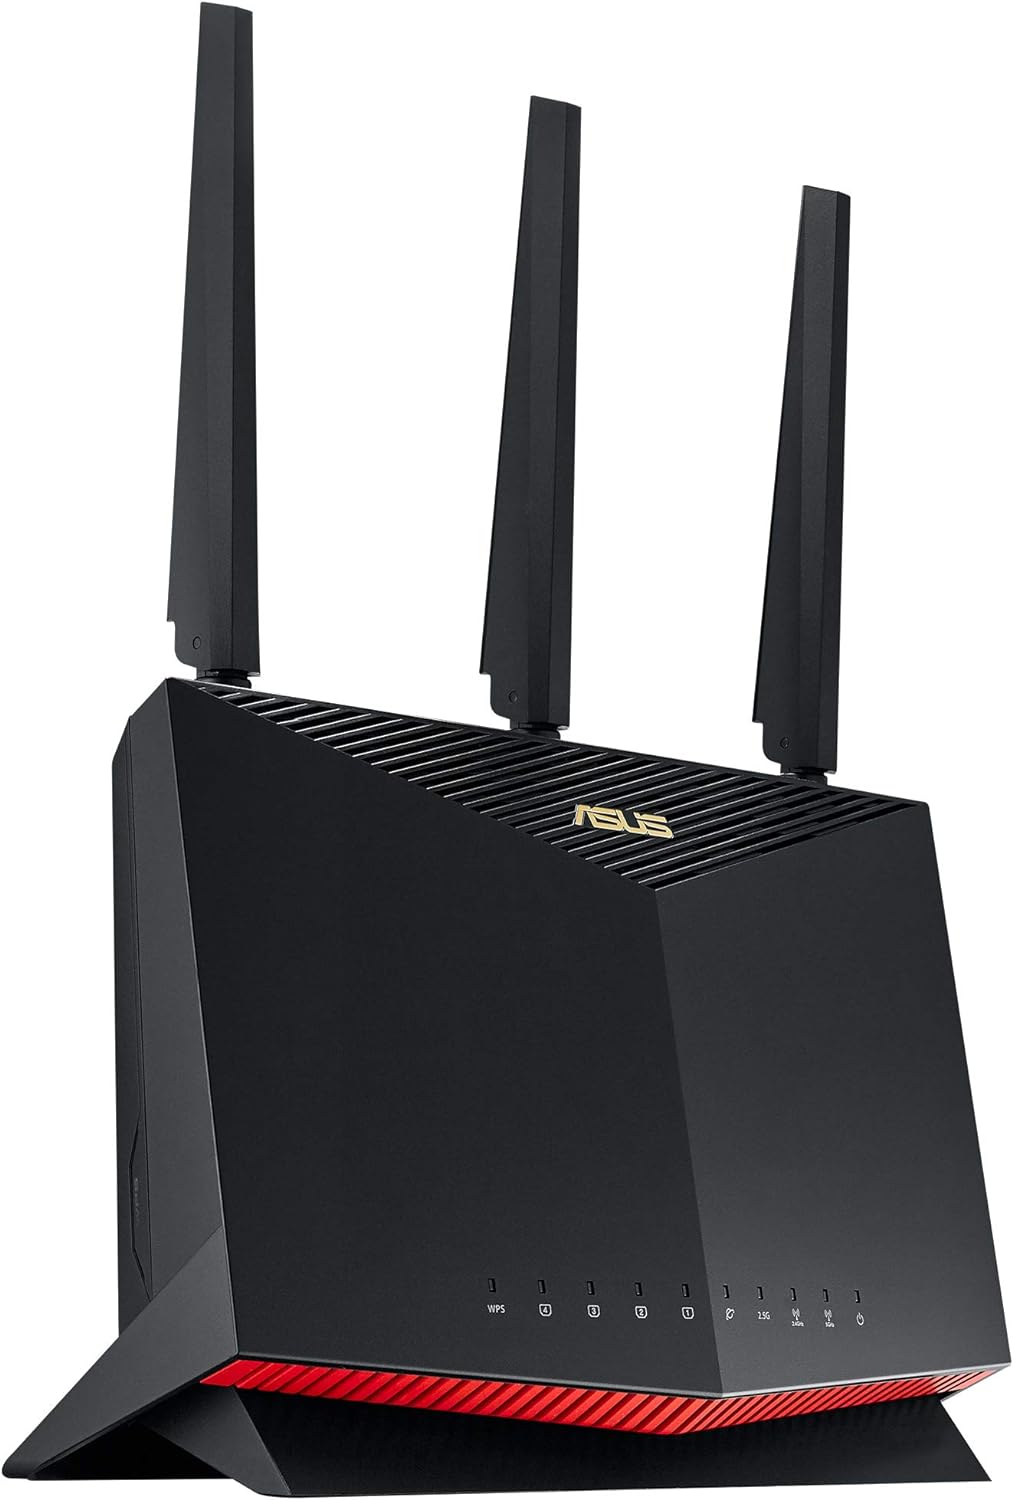 ASUS RT-AX86U (AX5700) Dual Band WiFi 6 Extendable Gaming Router - $180